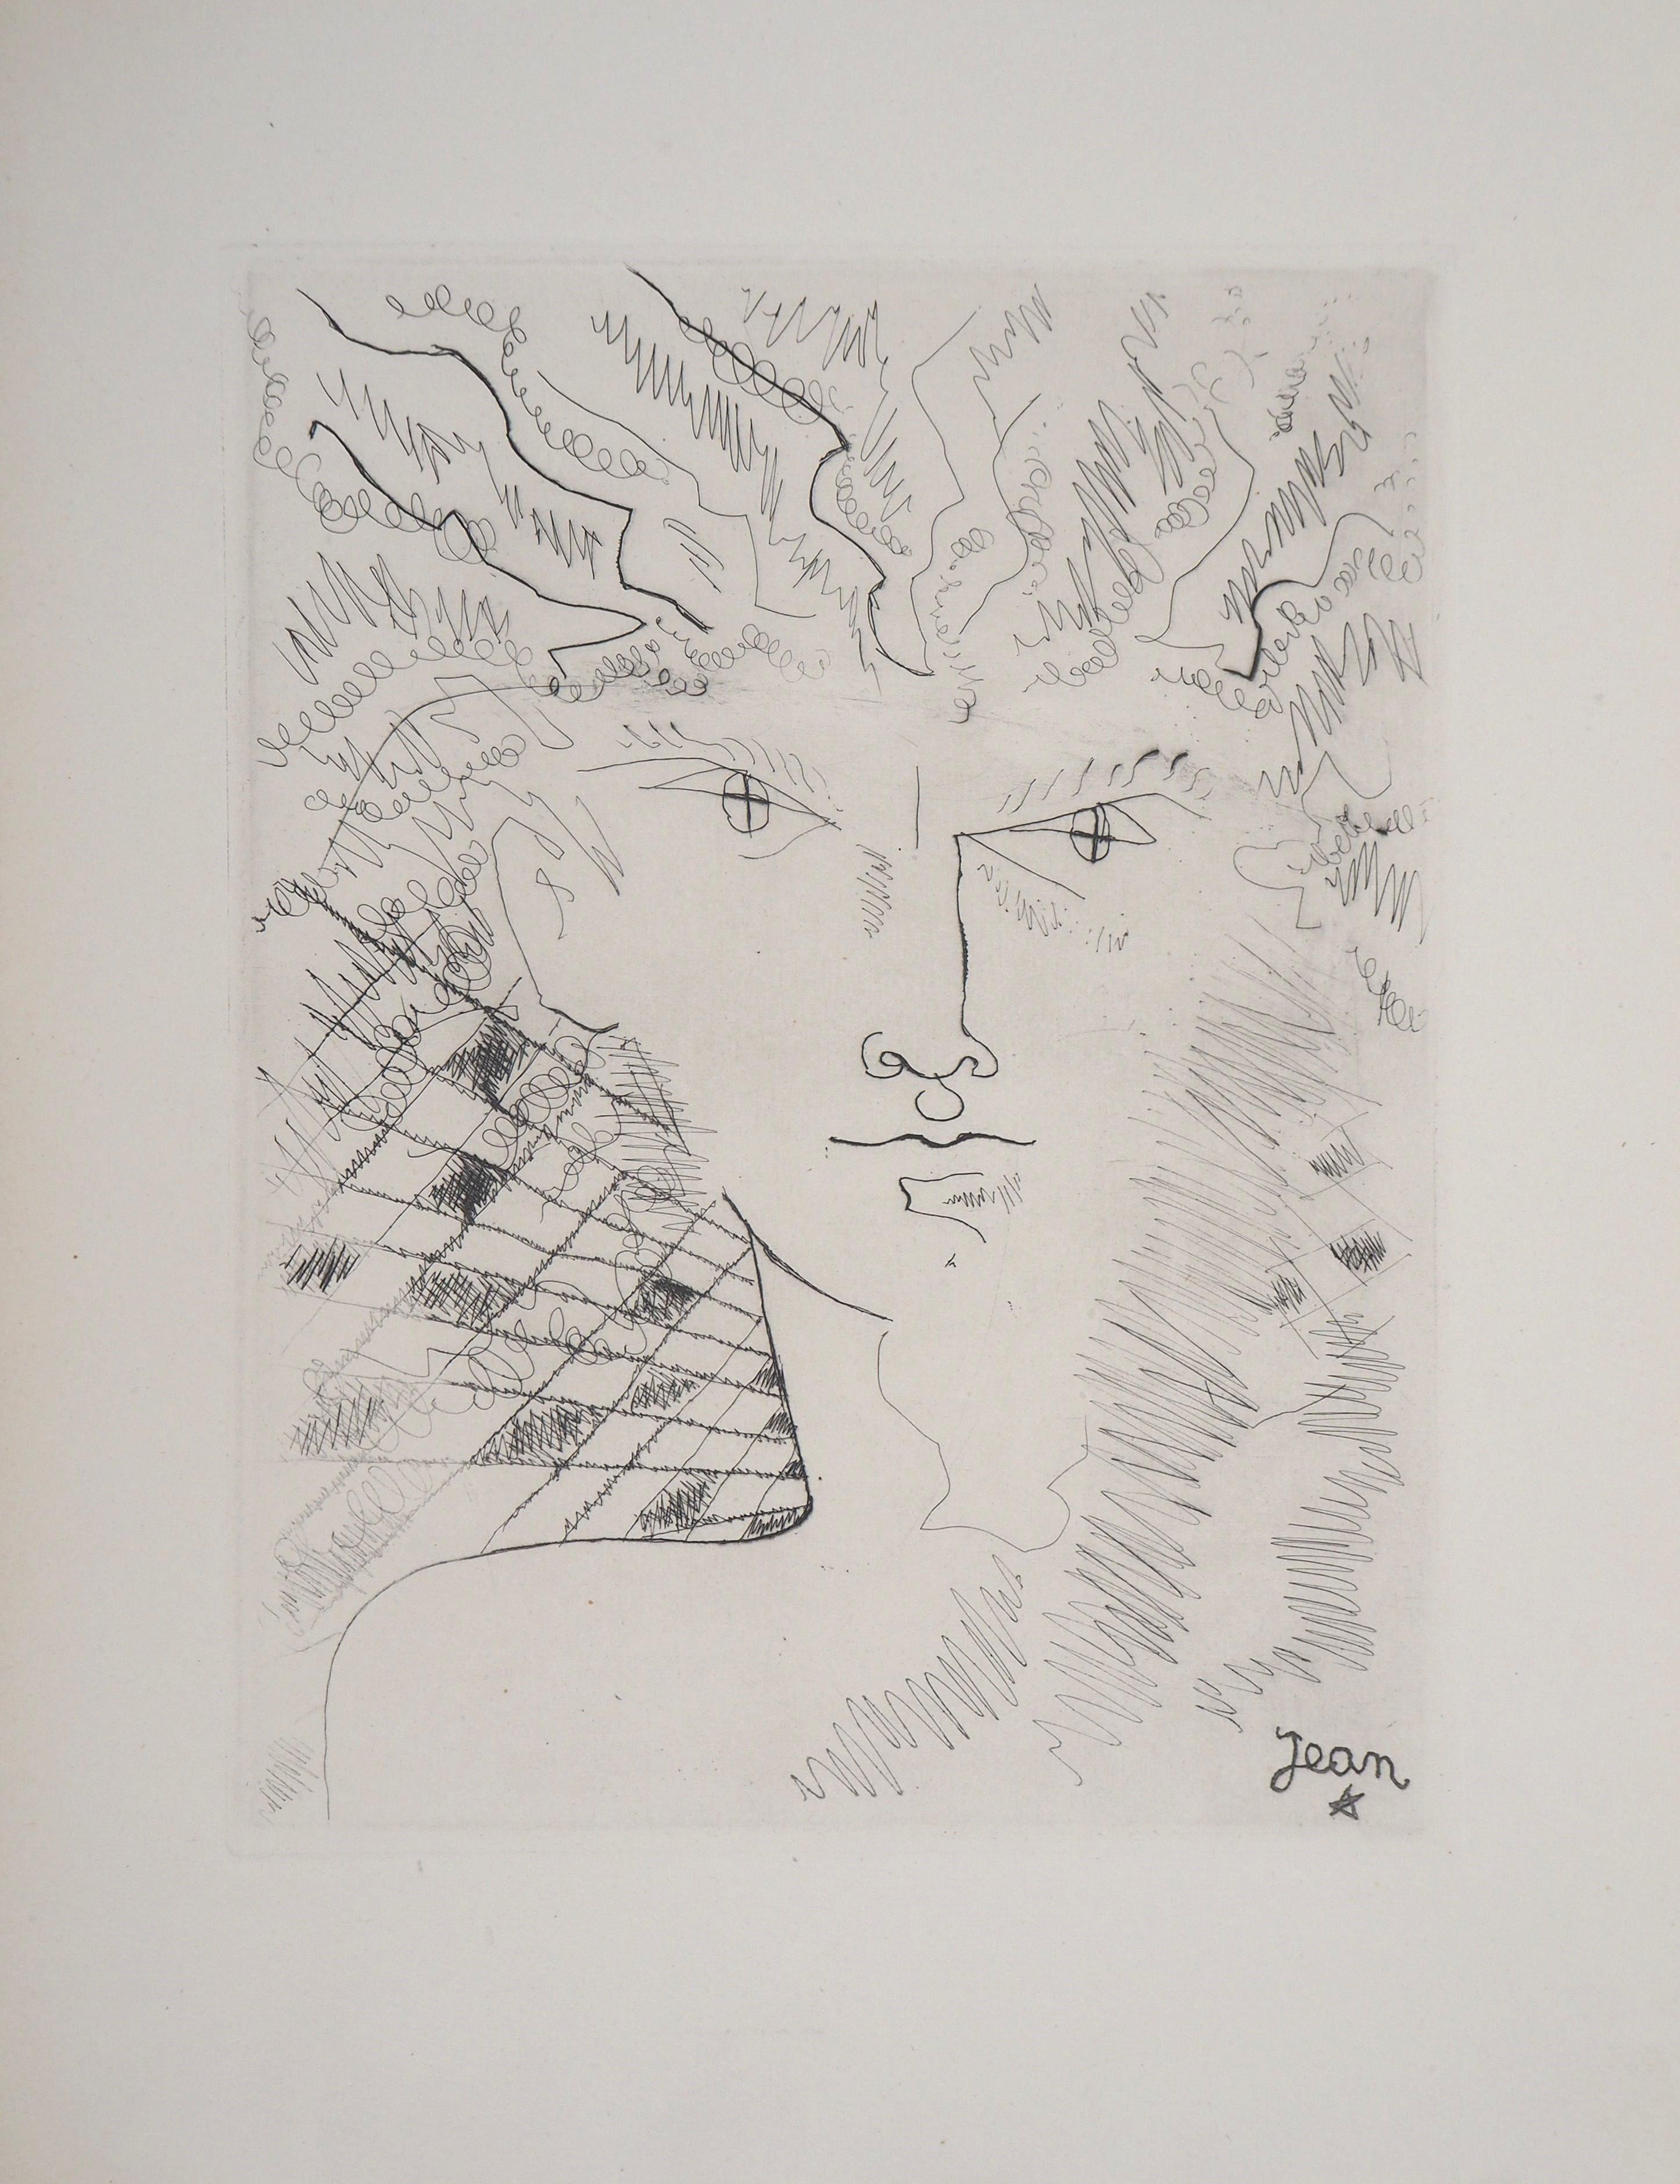 Jean Cocteau
Surrealist Portrait, 1946

Original etching
Printed signature in the plate
On BFK Rives vellum, 32,5 x 25 cm (c. 12,7 x 9,8 inch)
Edition limited to 300 copies (unnumbered exemplars)

INFORMATION : This etching is a part of the set